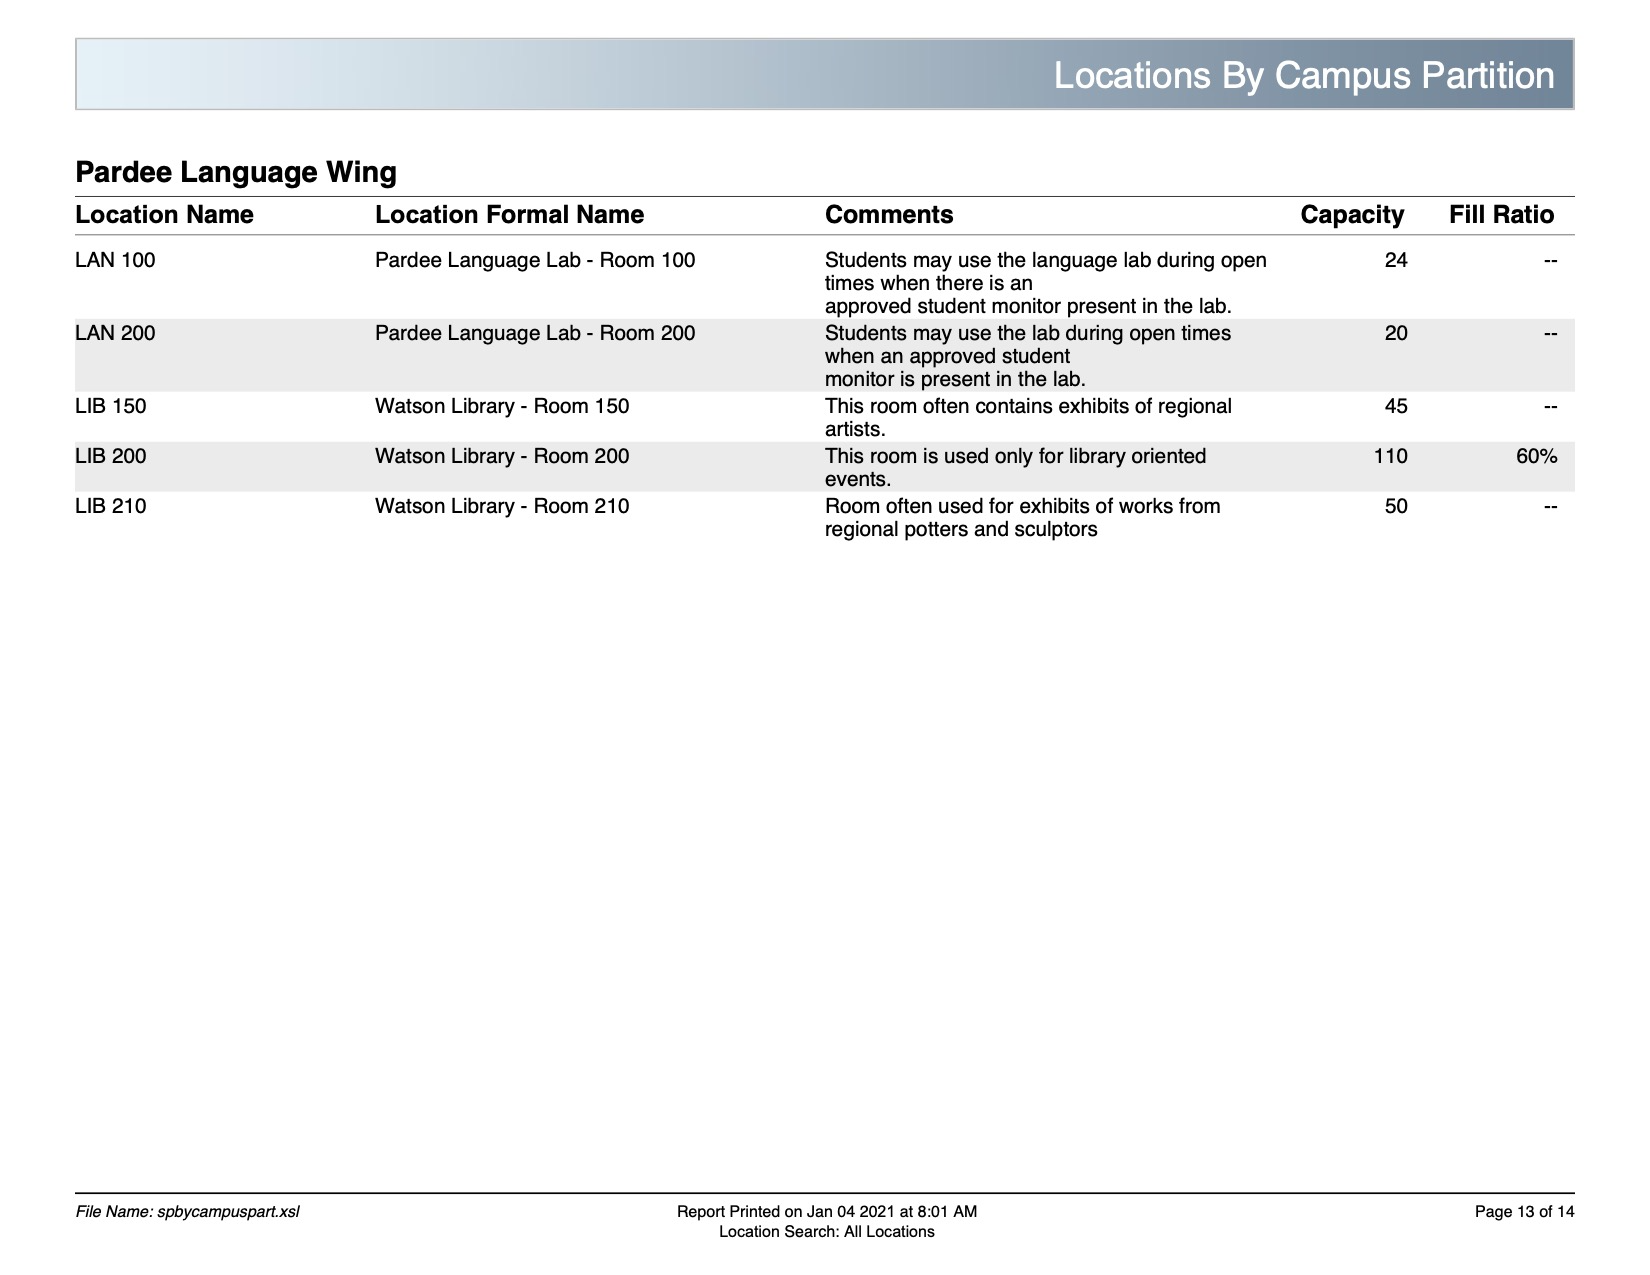 Locations by campus partition example